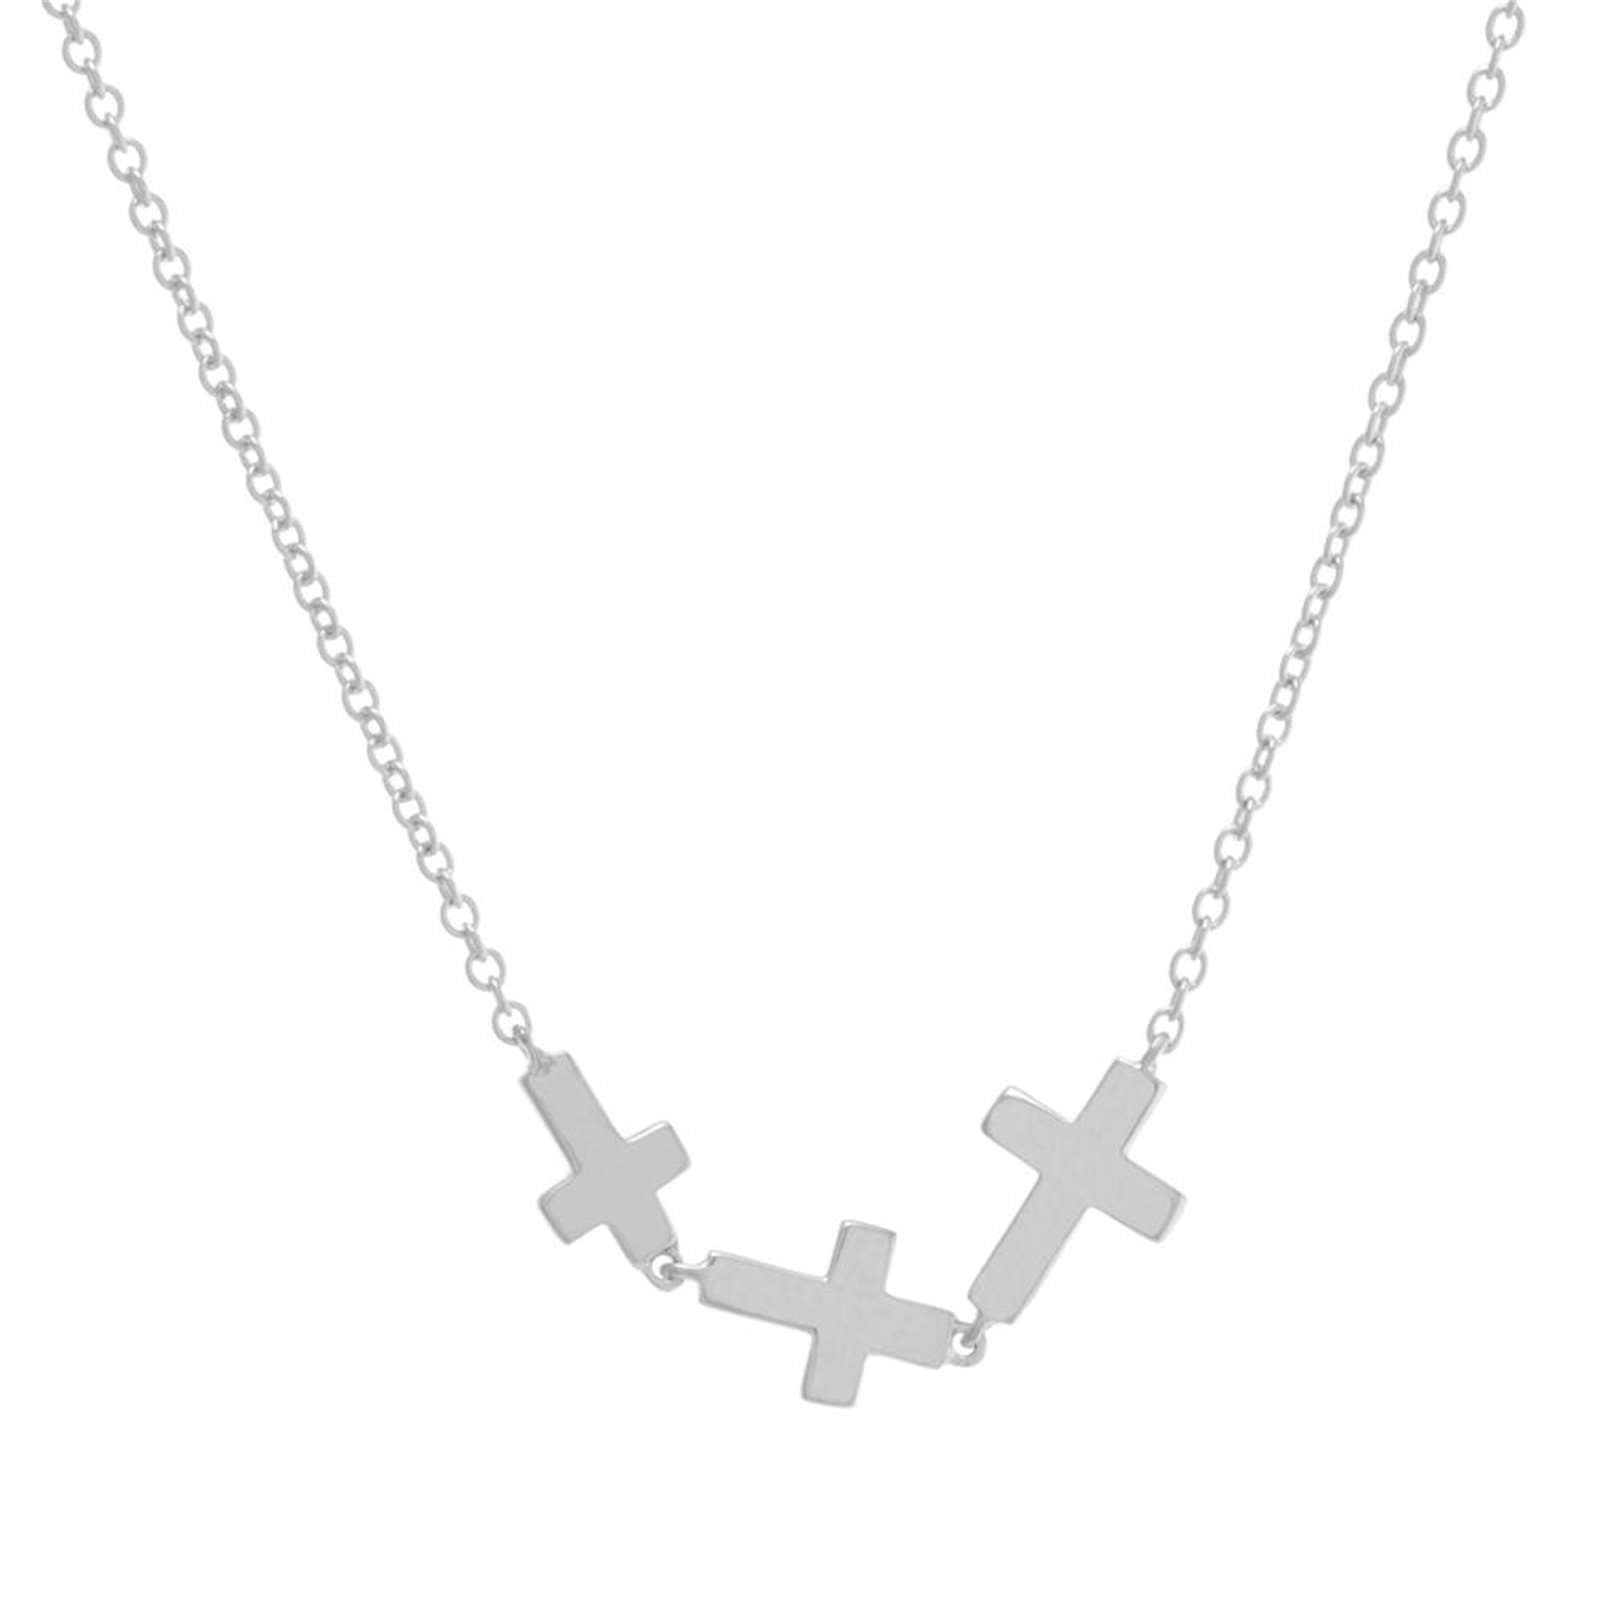 Athra Women Triple Sideways Cross Necklace With Extension